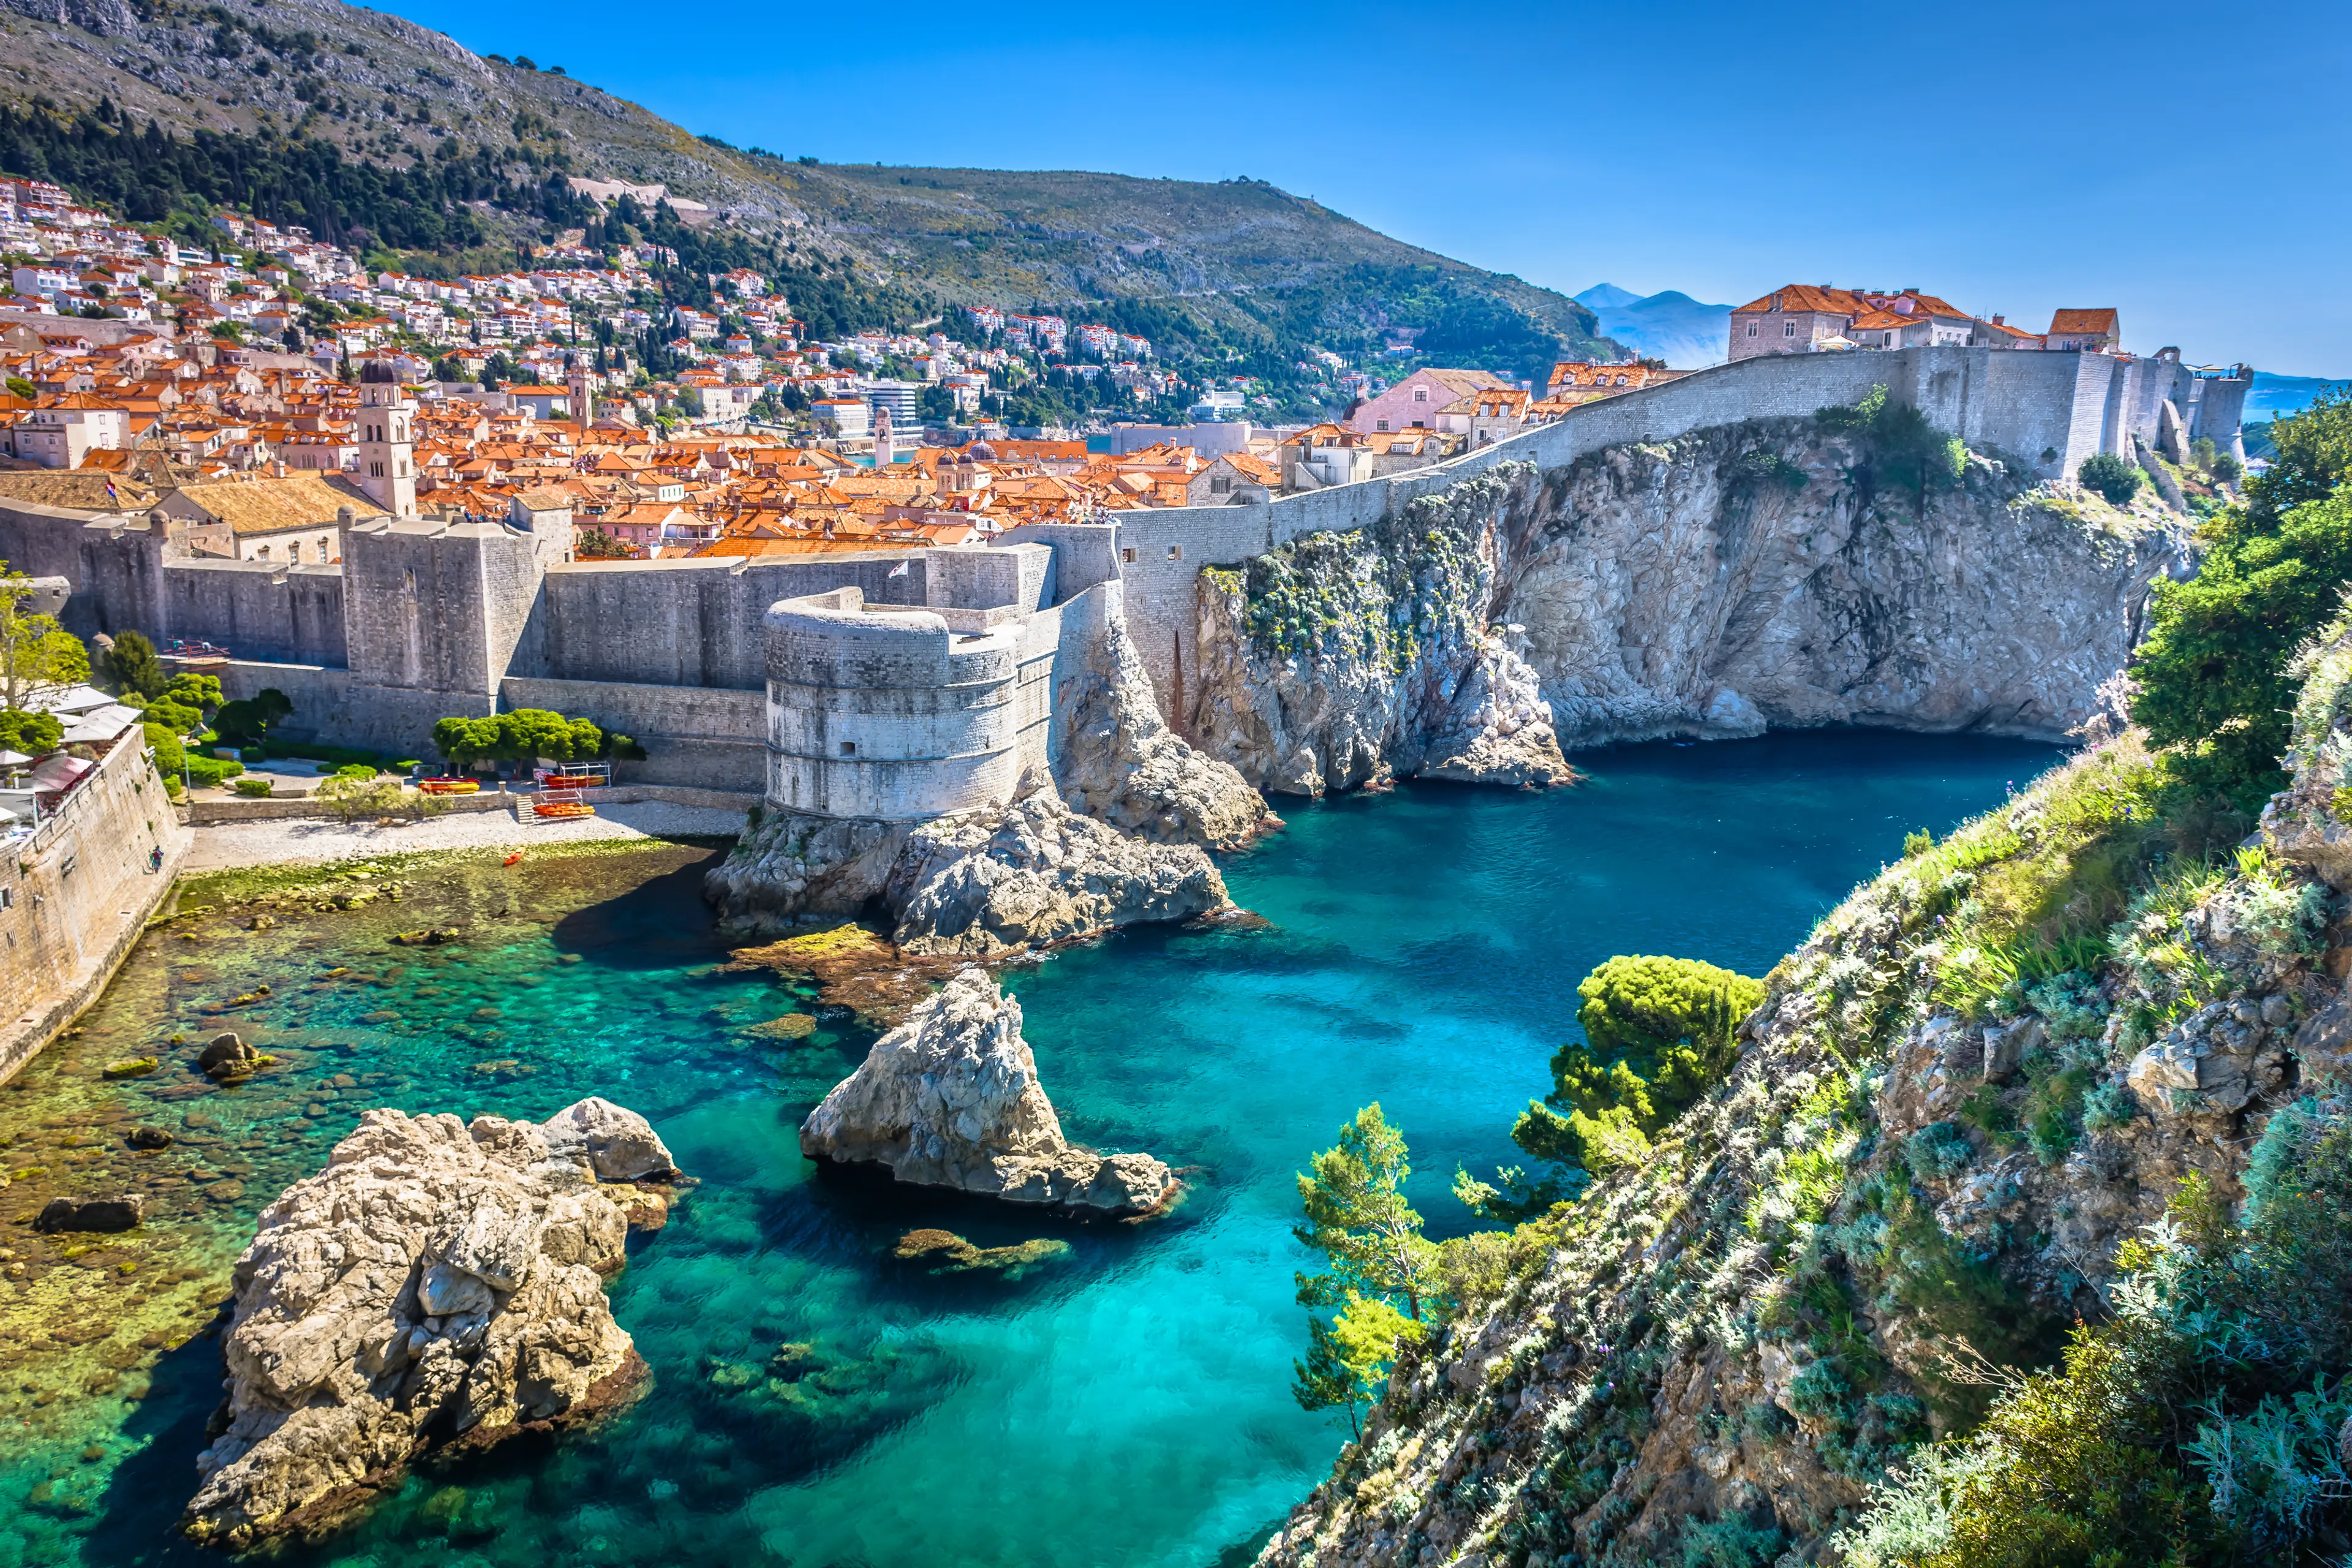 1-Day Local Food & Wine Experience in Dubrovnik for Solo Travelers